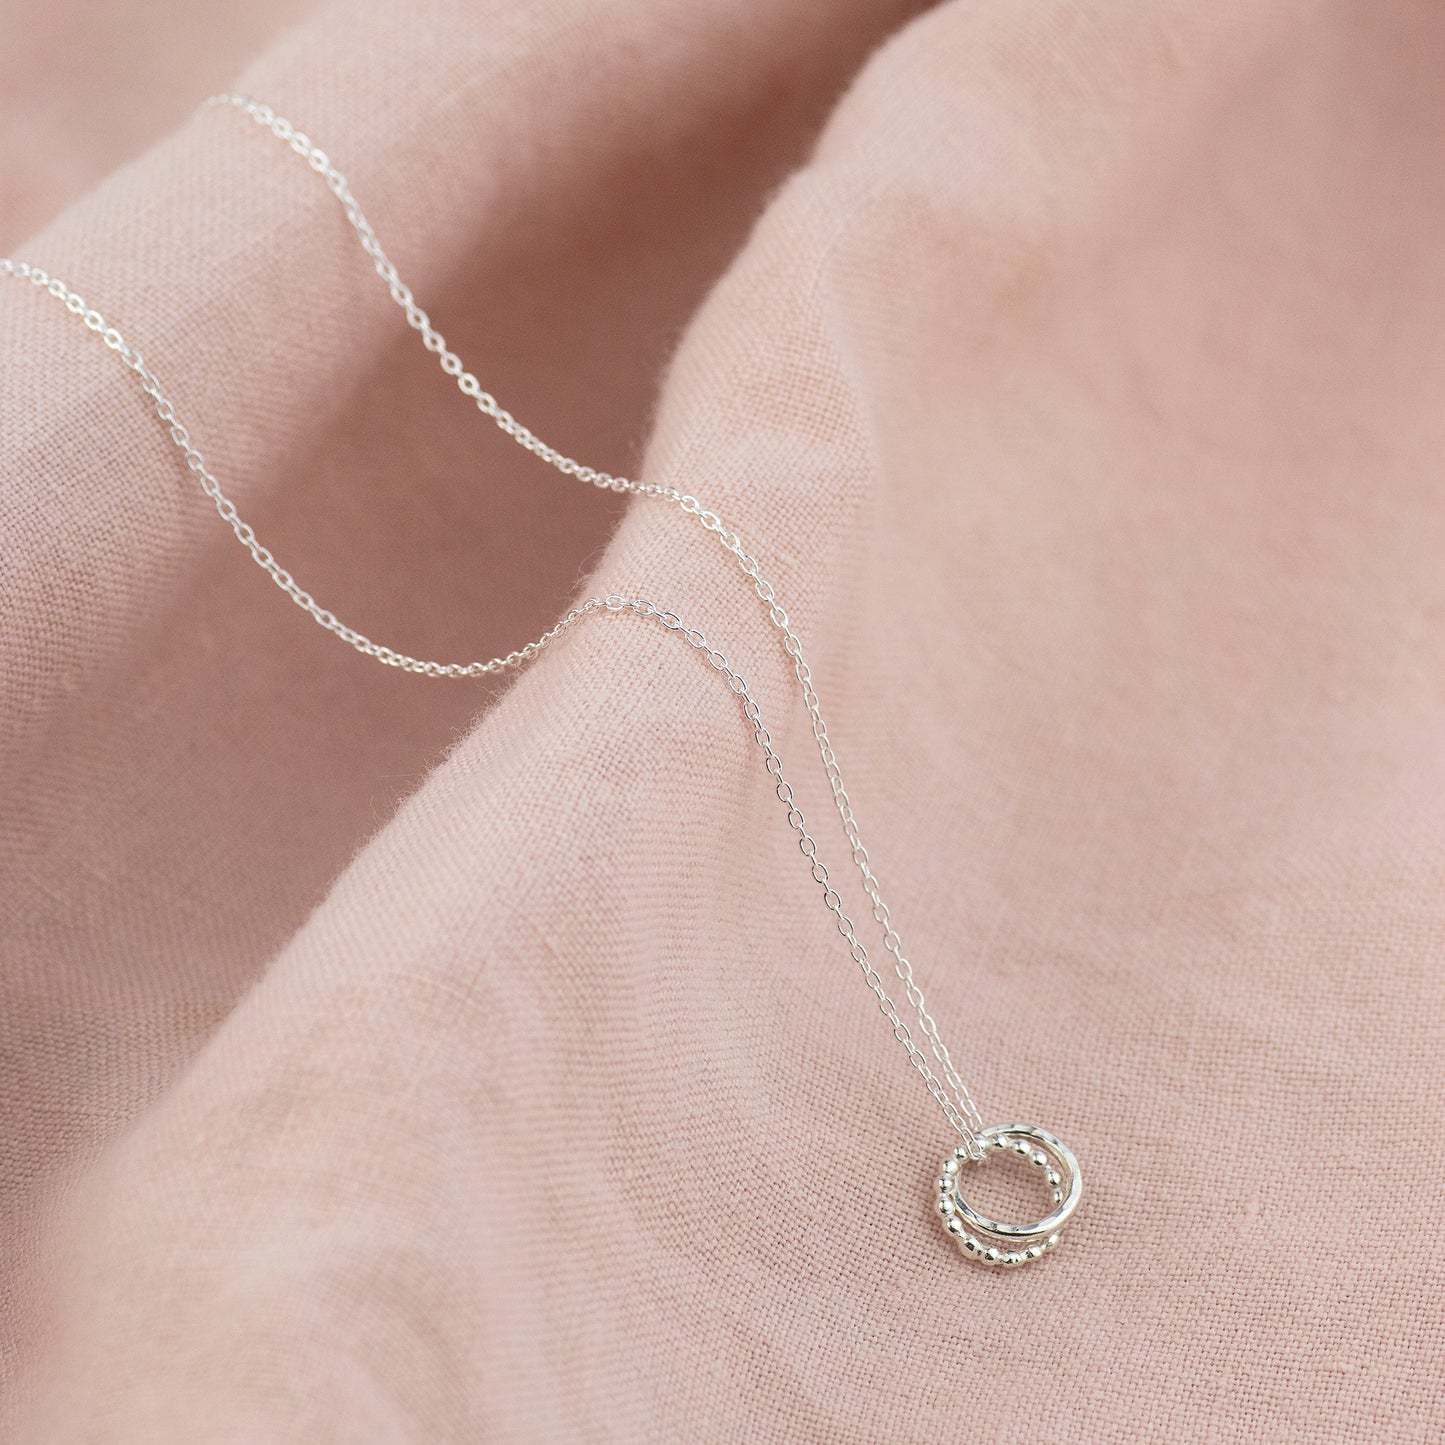 Friendship Necklace - Gift for Friend - Silver Love Knot Necklace